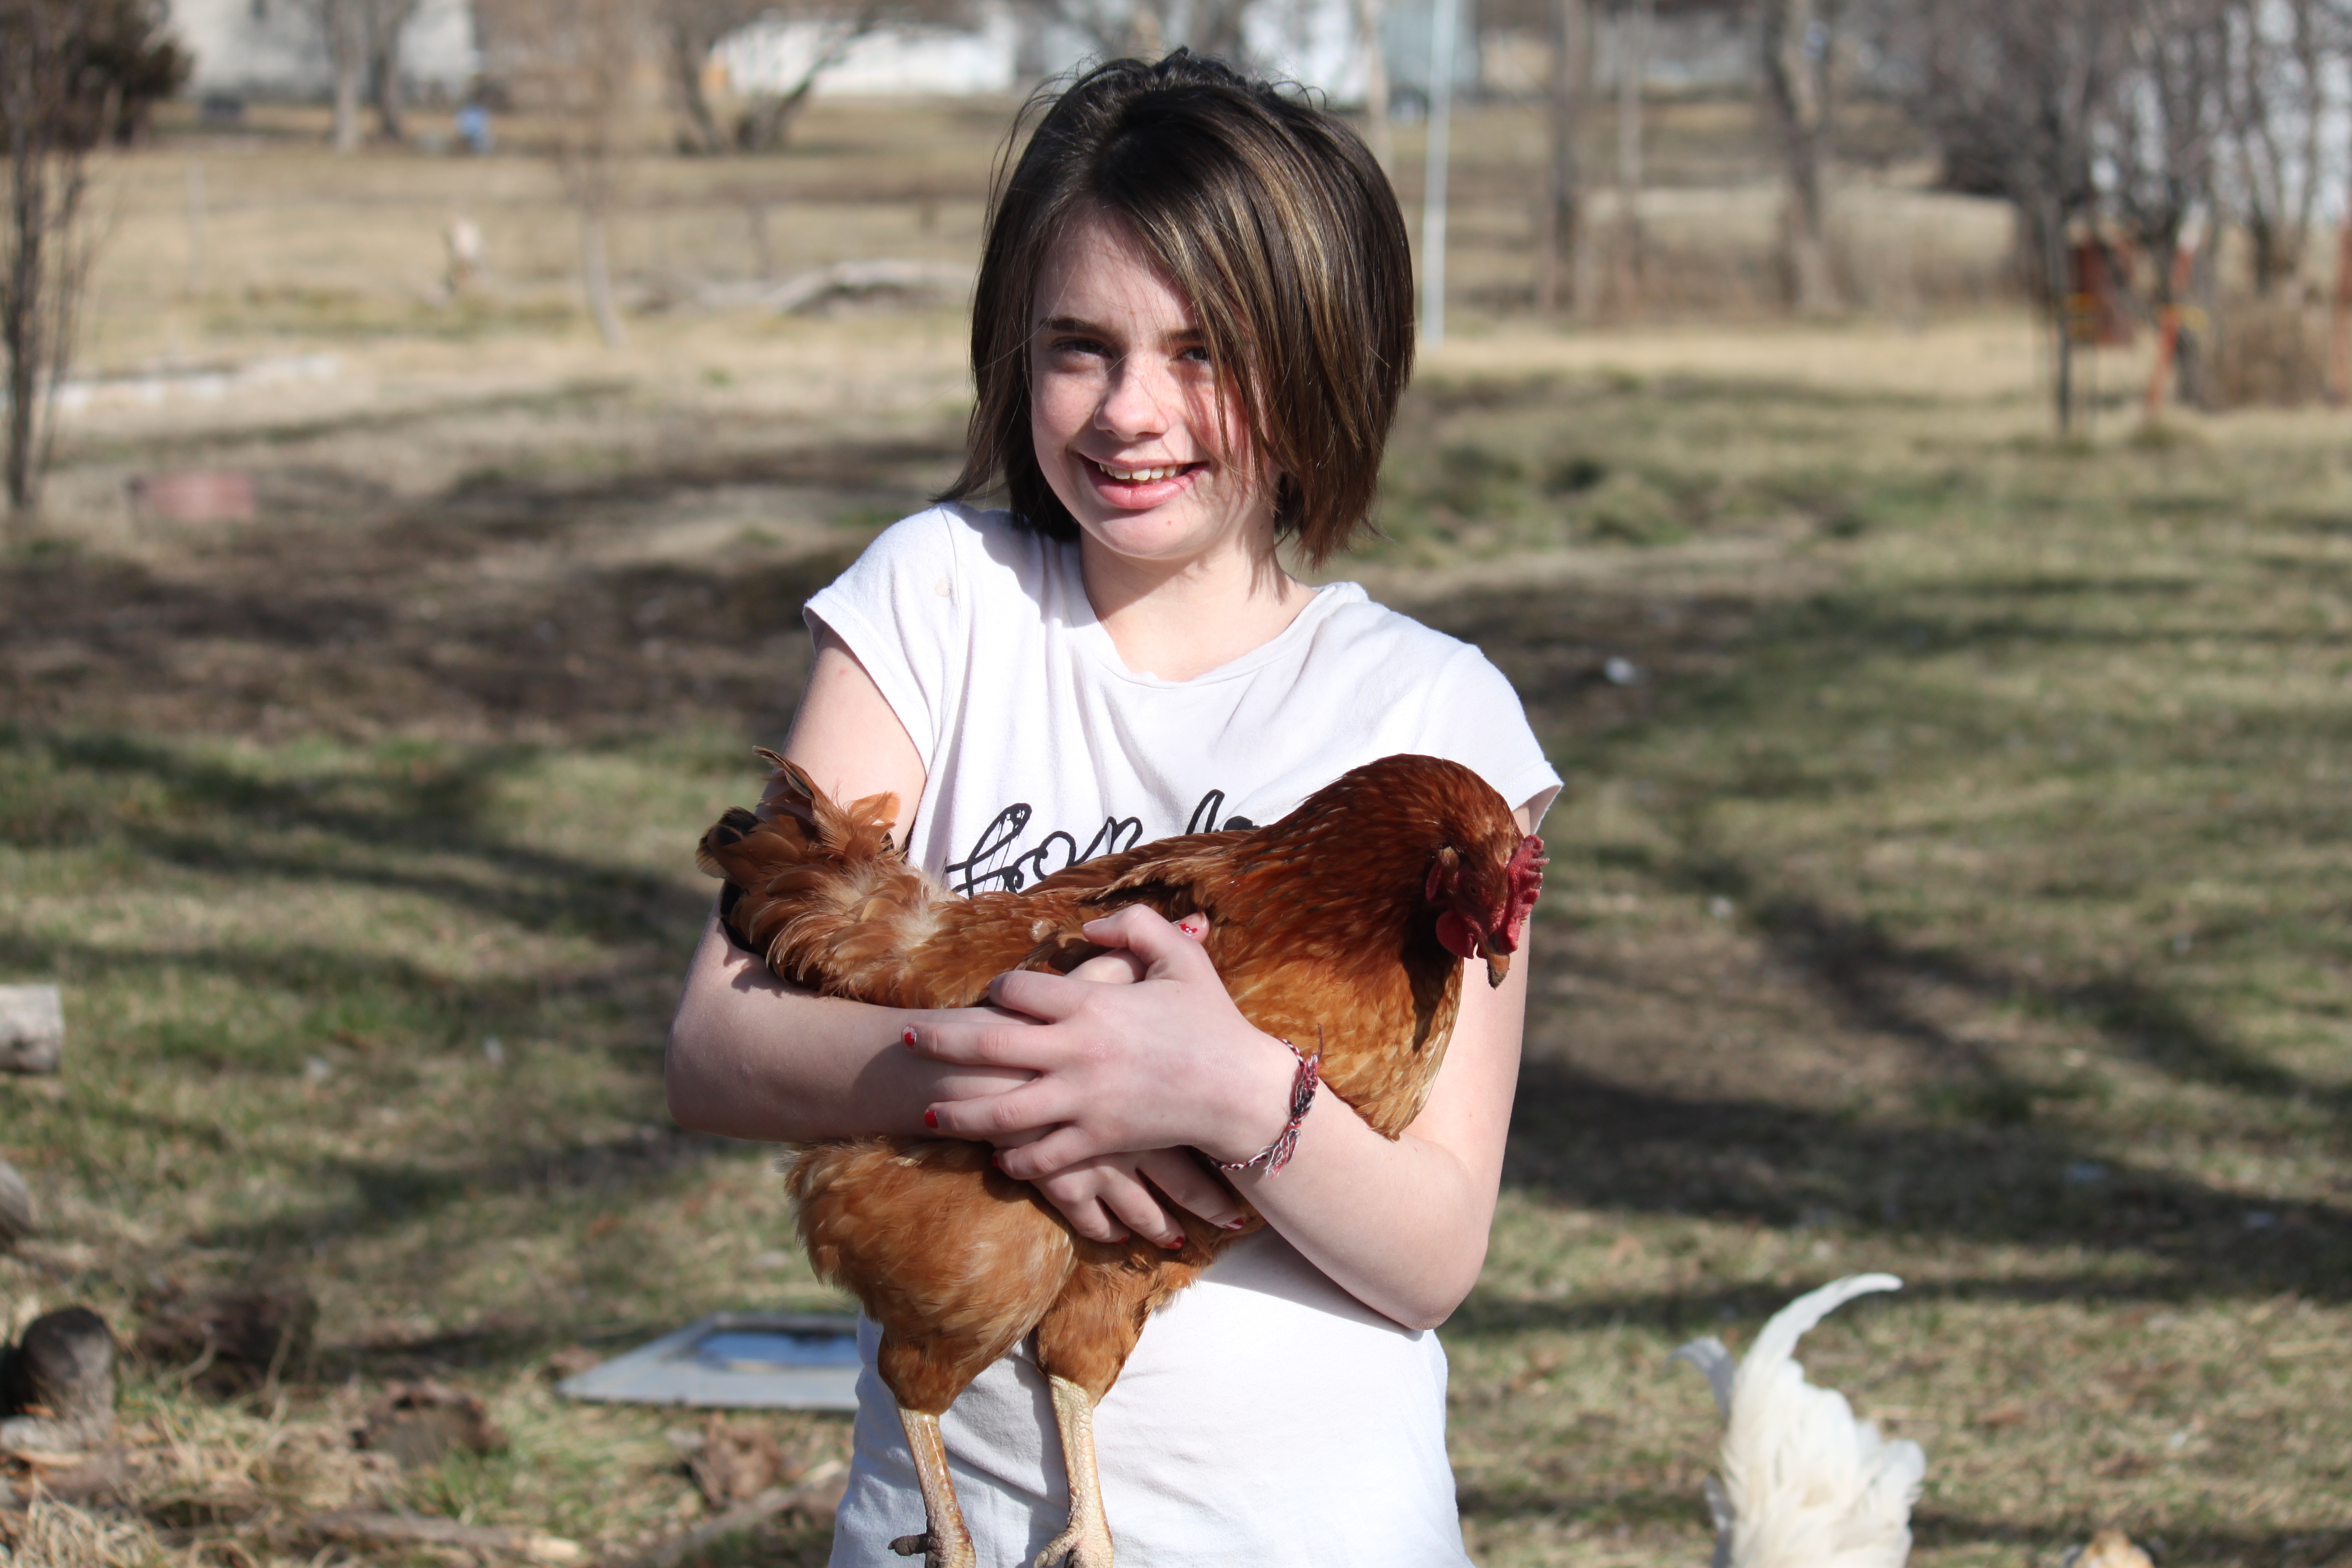 My cousin conquers her fear of chickens.